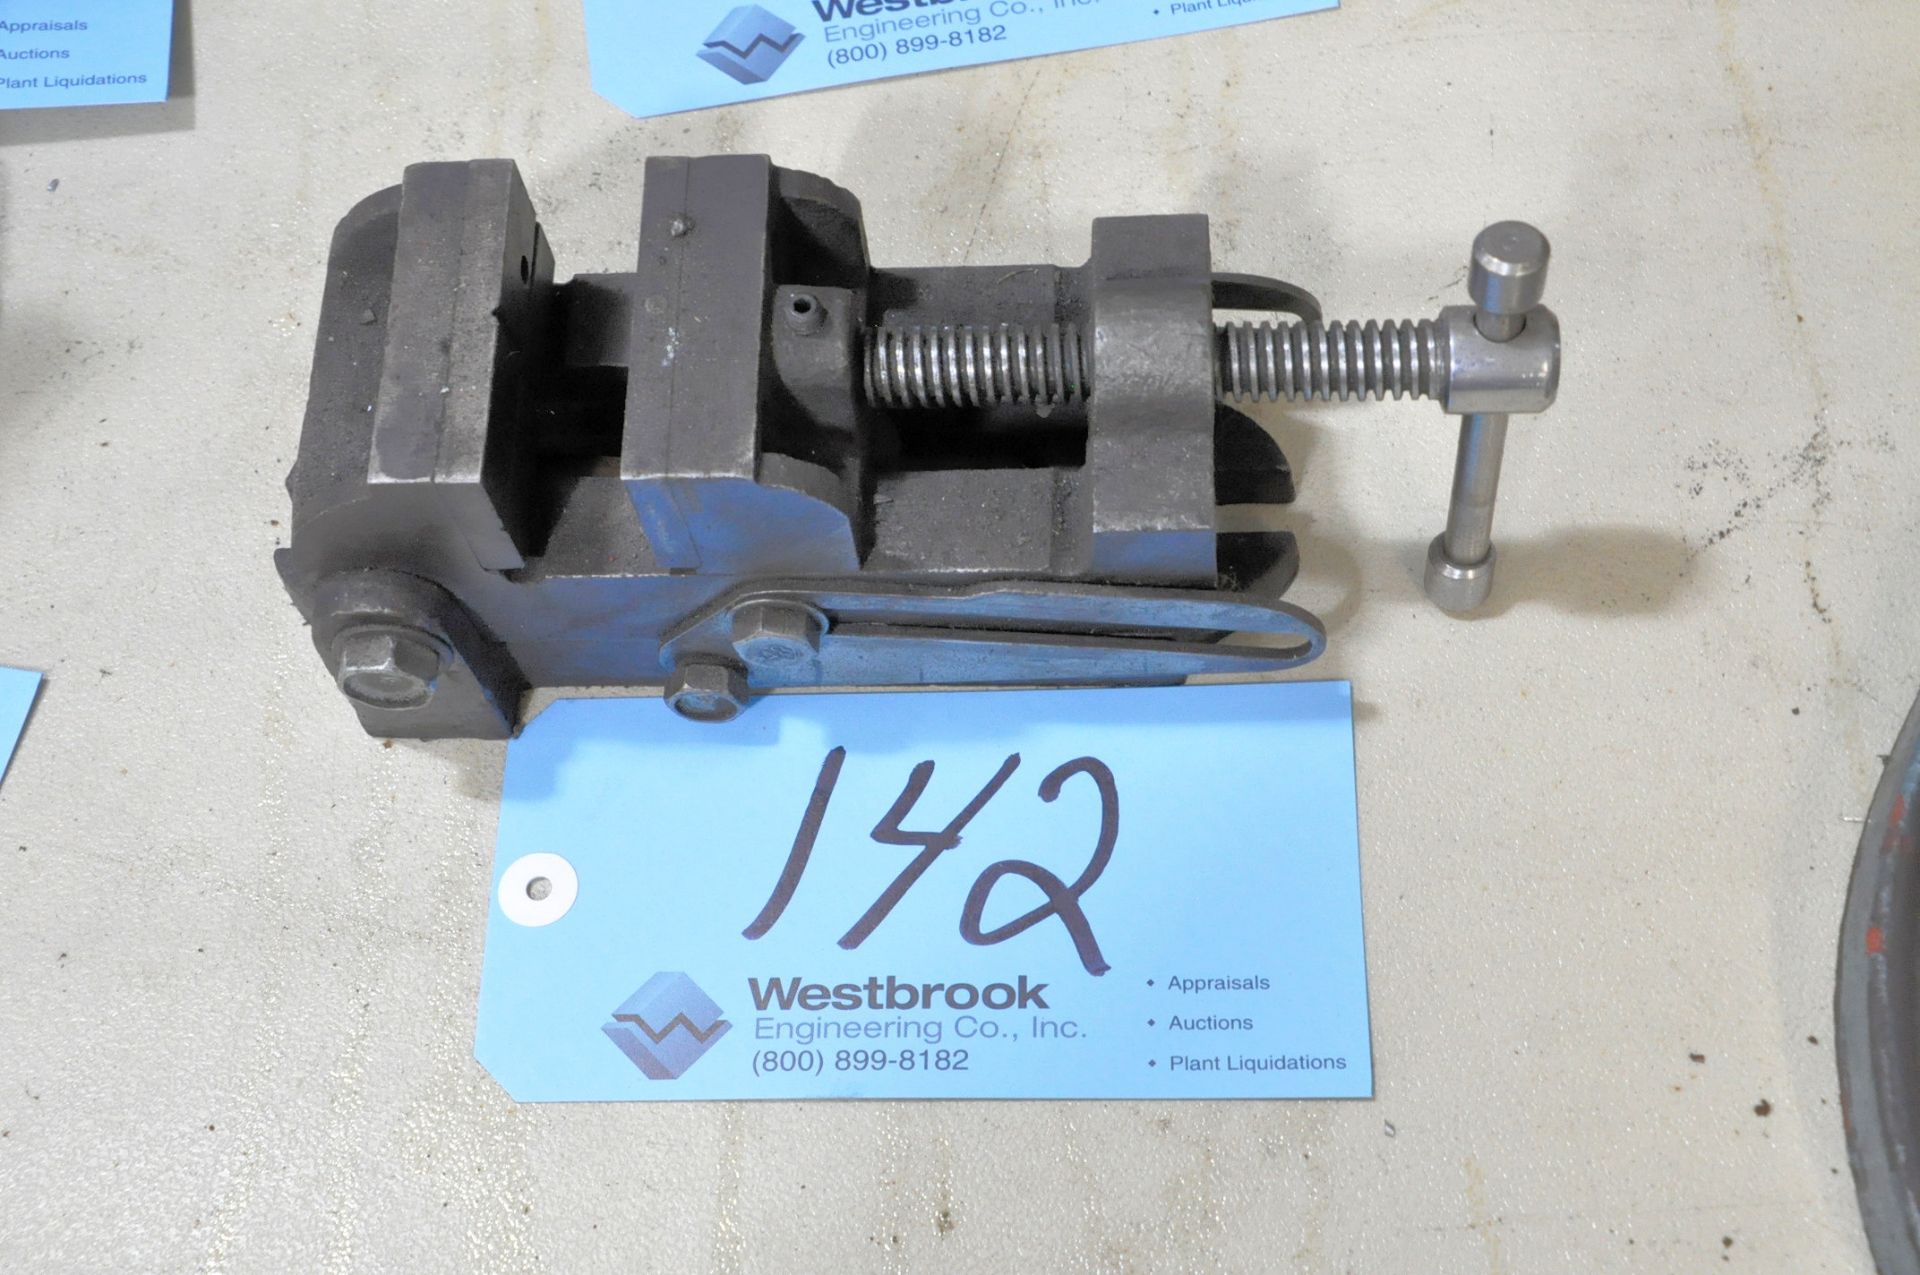 2-1/2" Inclinable Machine Vise